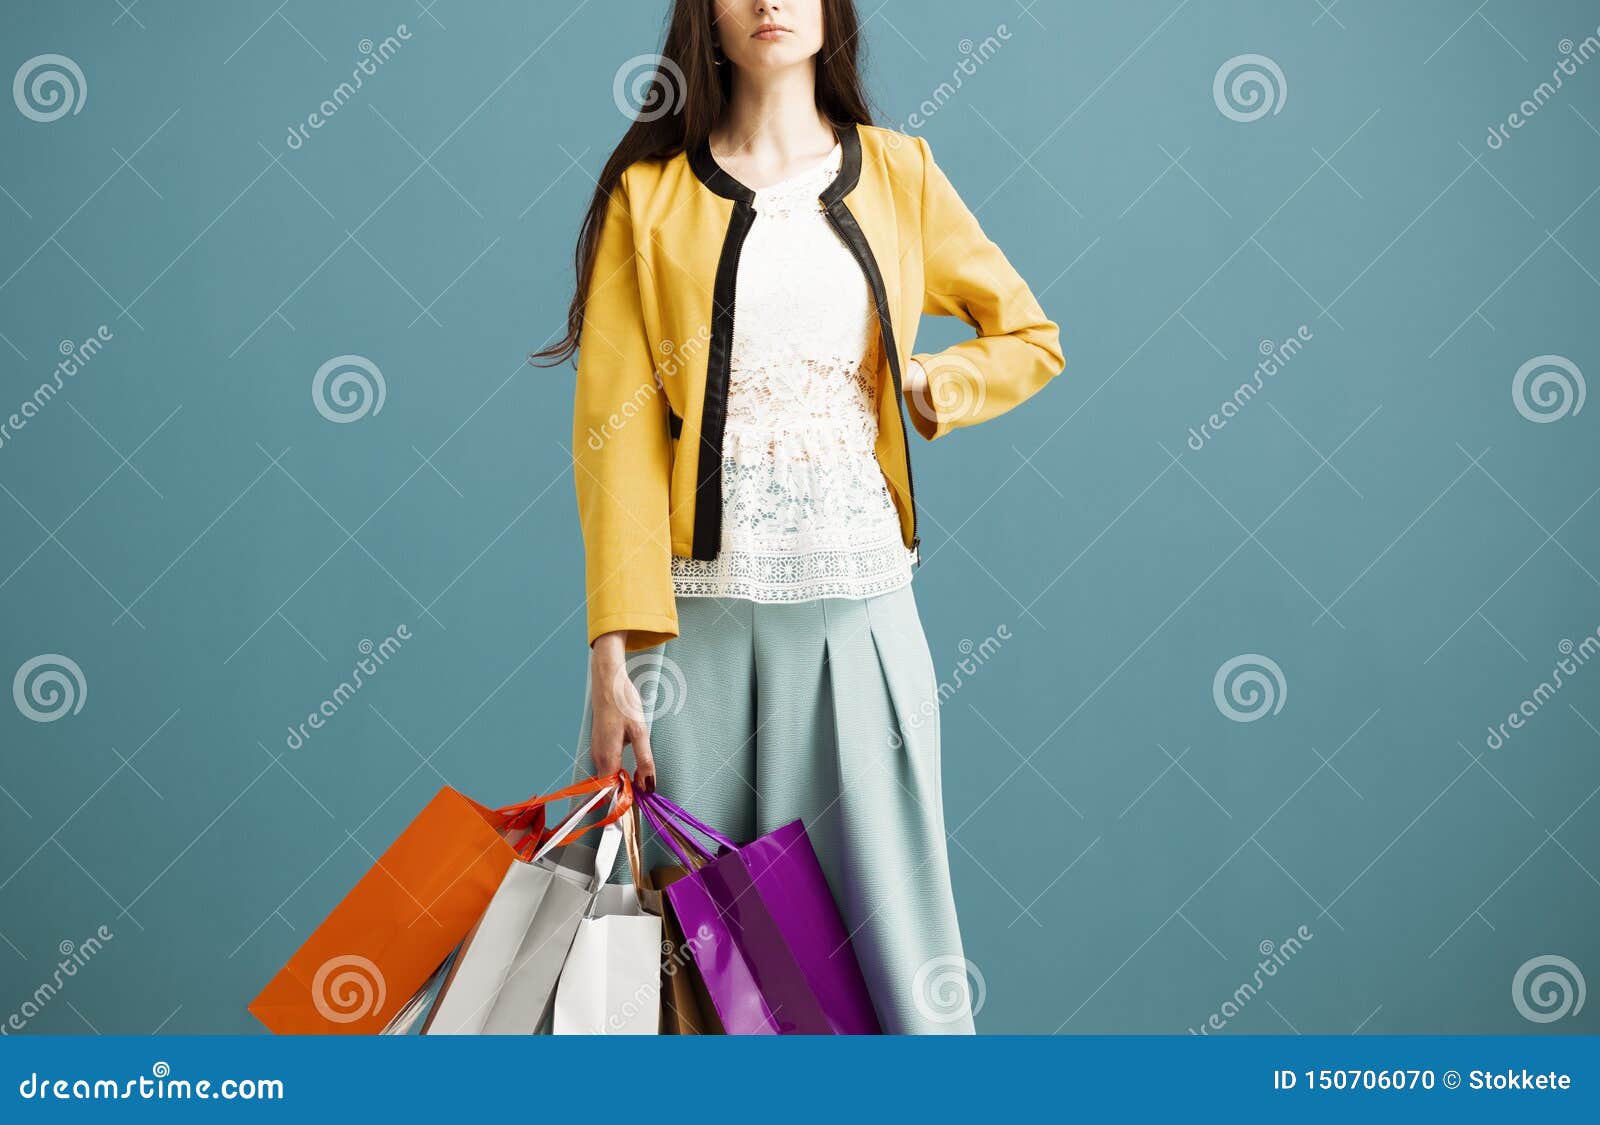 Stylish Woman Carrying a Lot of Shopping Bags Stock Photo - Image of ...